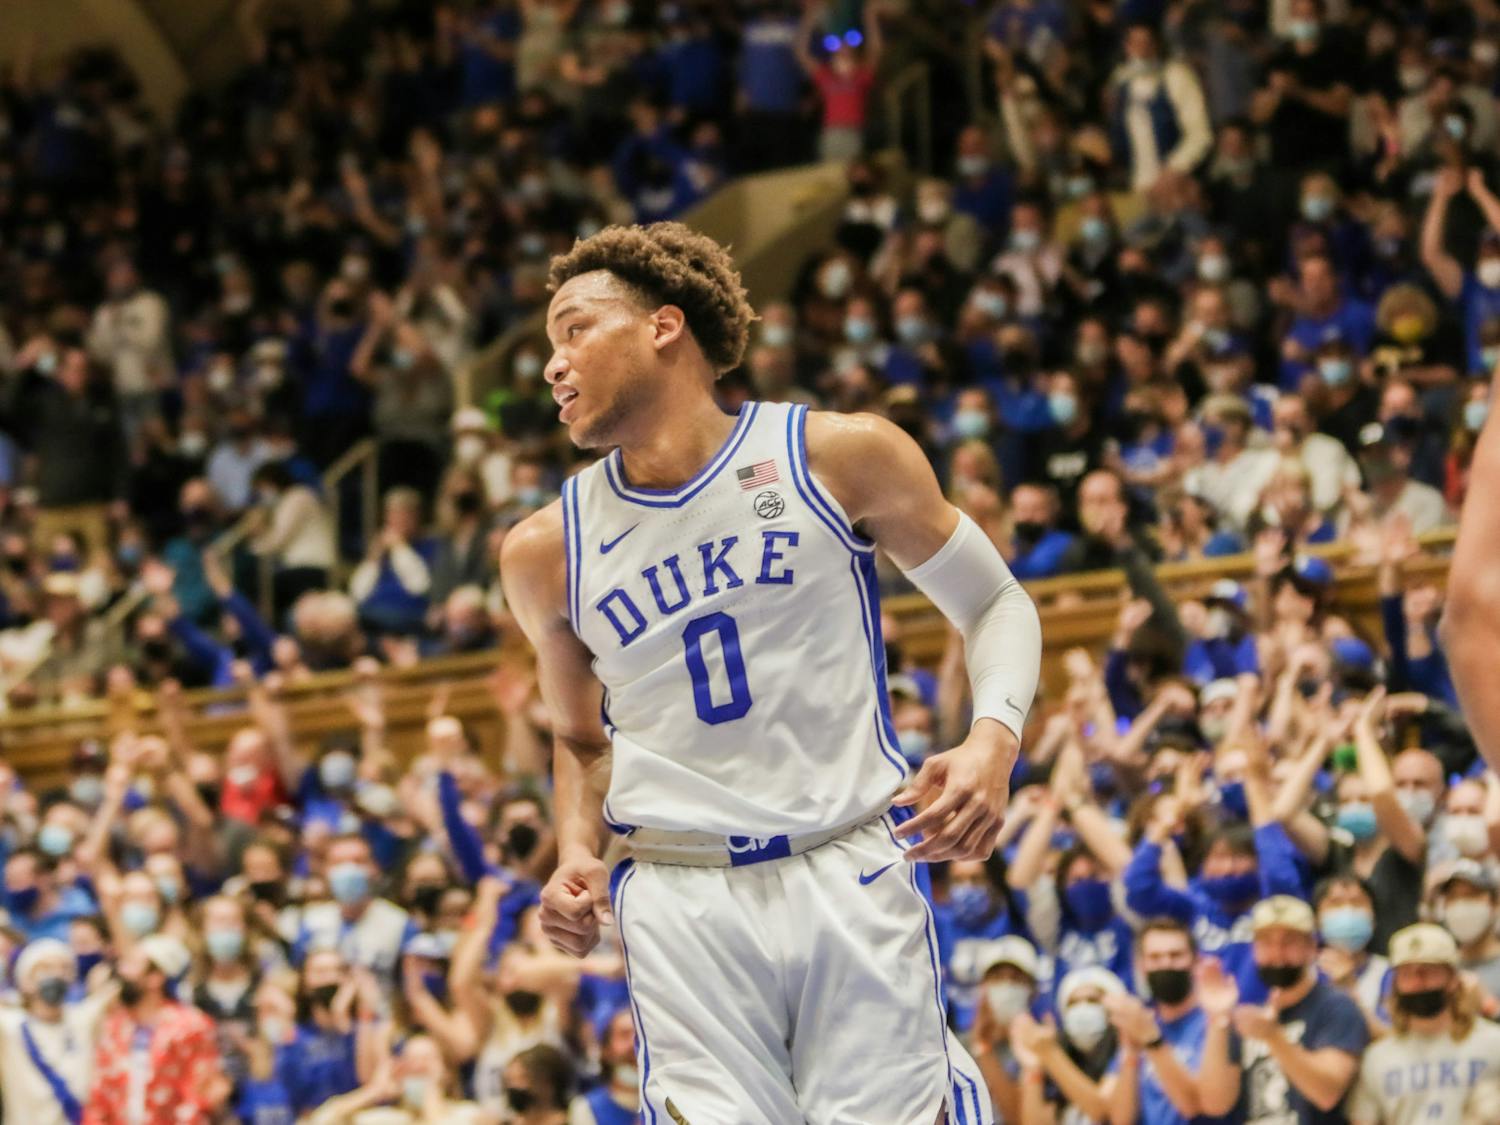 Wendell Moore Jr., has emerged as the leader of this year's team as he has averaged 17 points, six rebounds and five assists on the year.